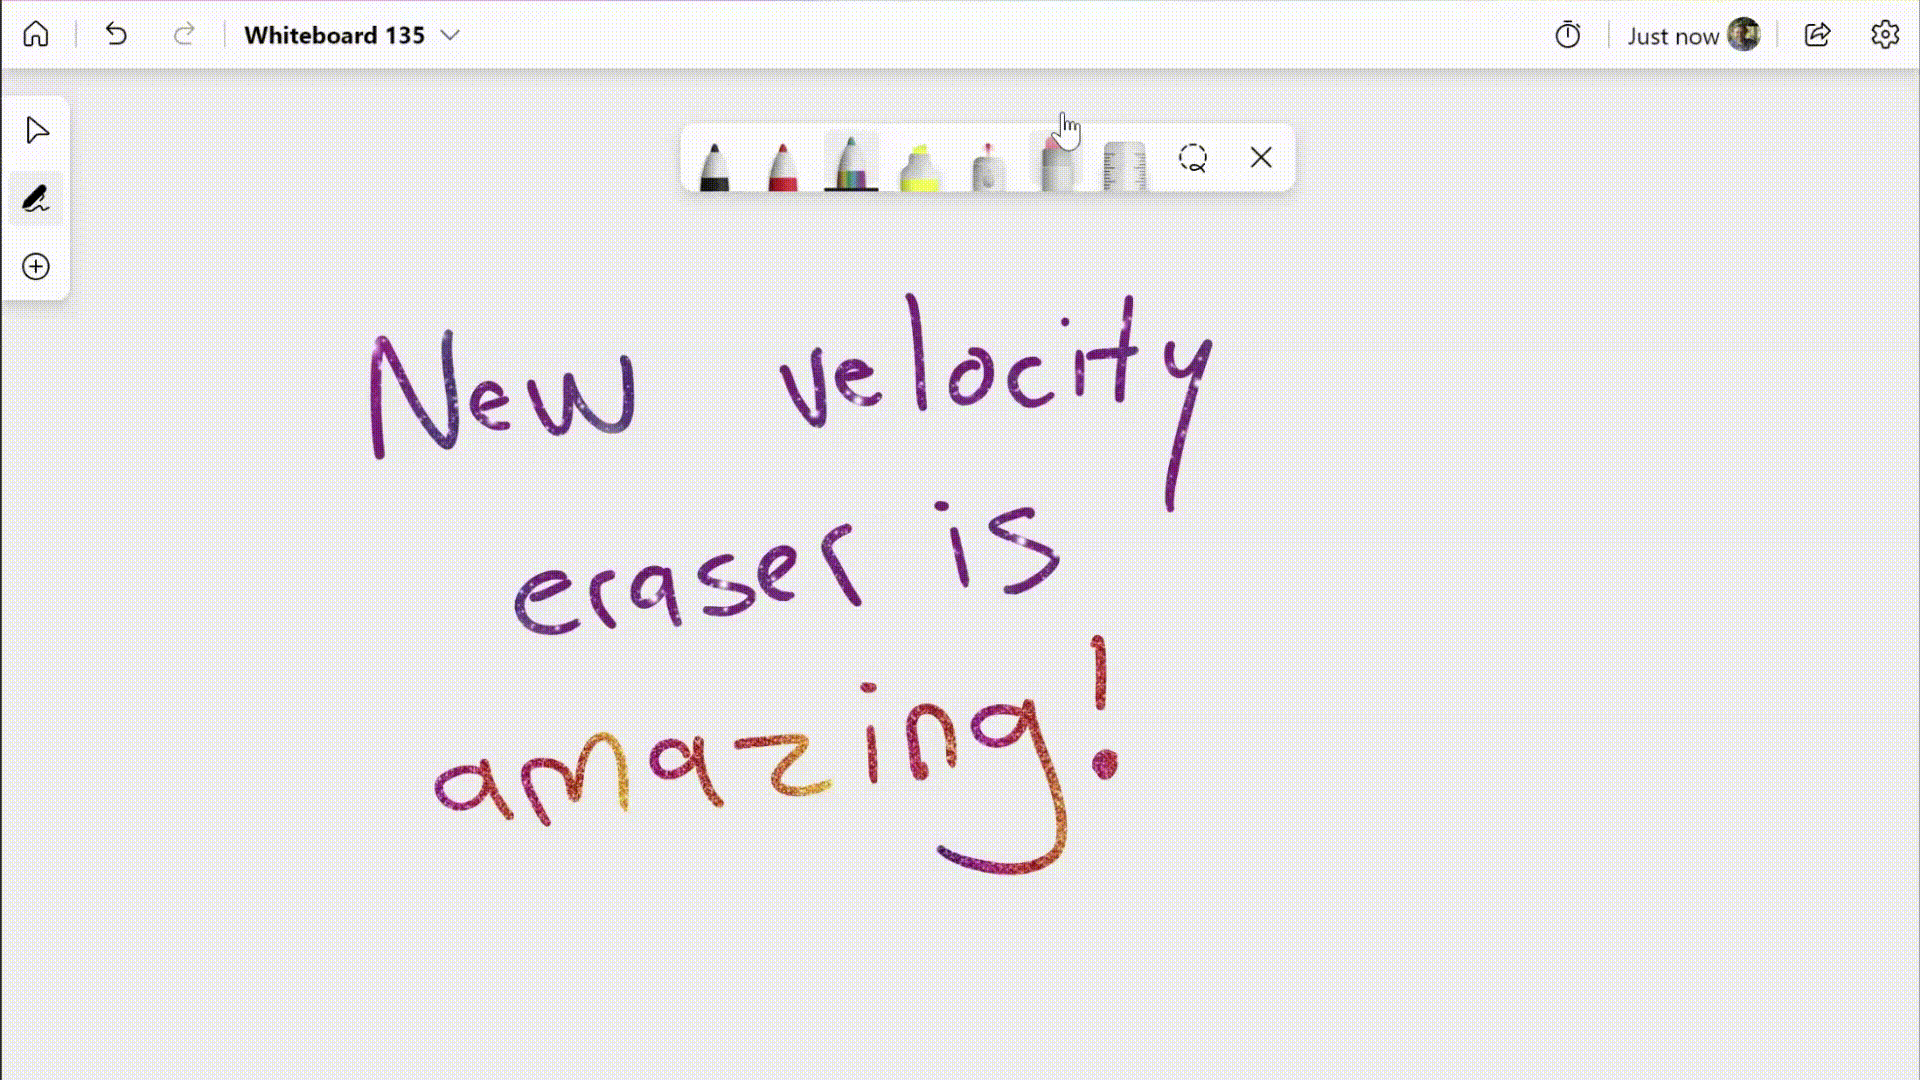 An animated image demonstrating the new partial eraser, which gets bigger the faster you erase on a whiteboard.